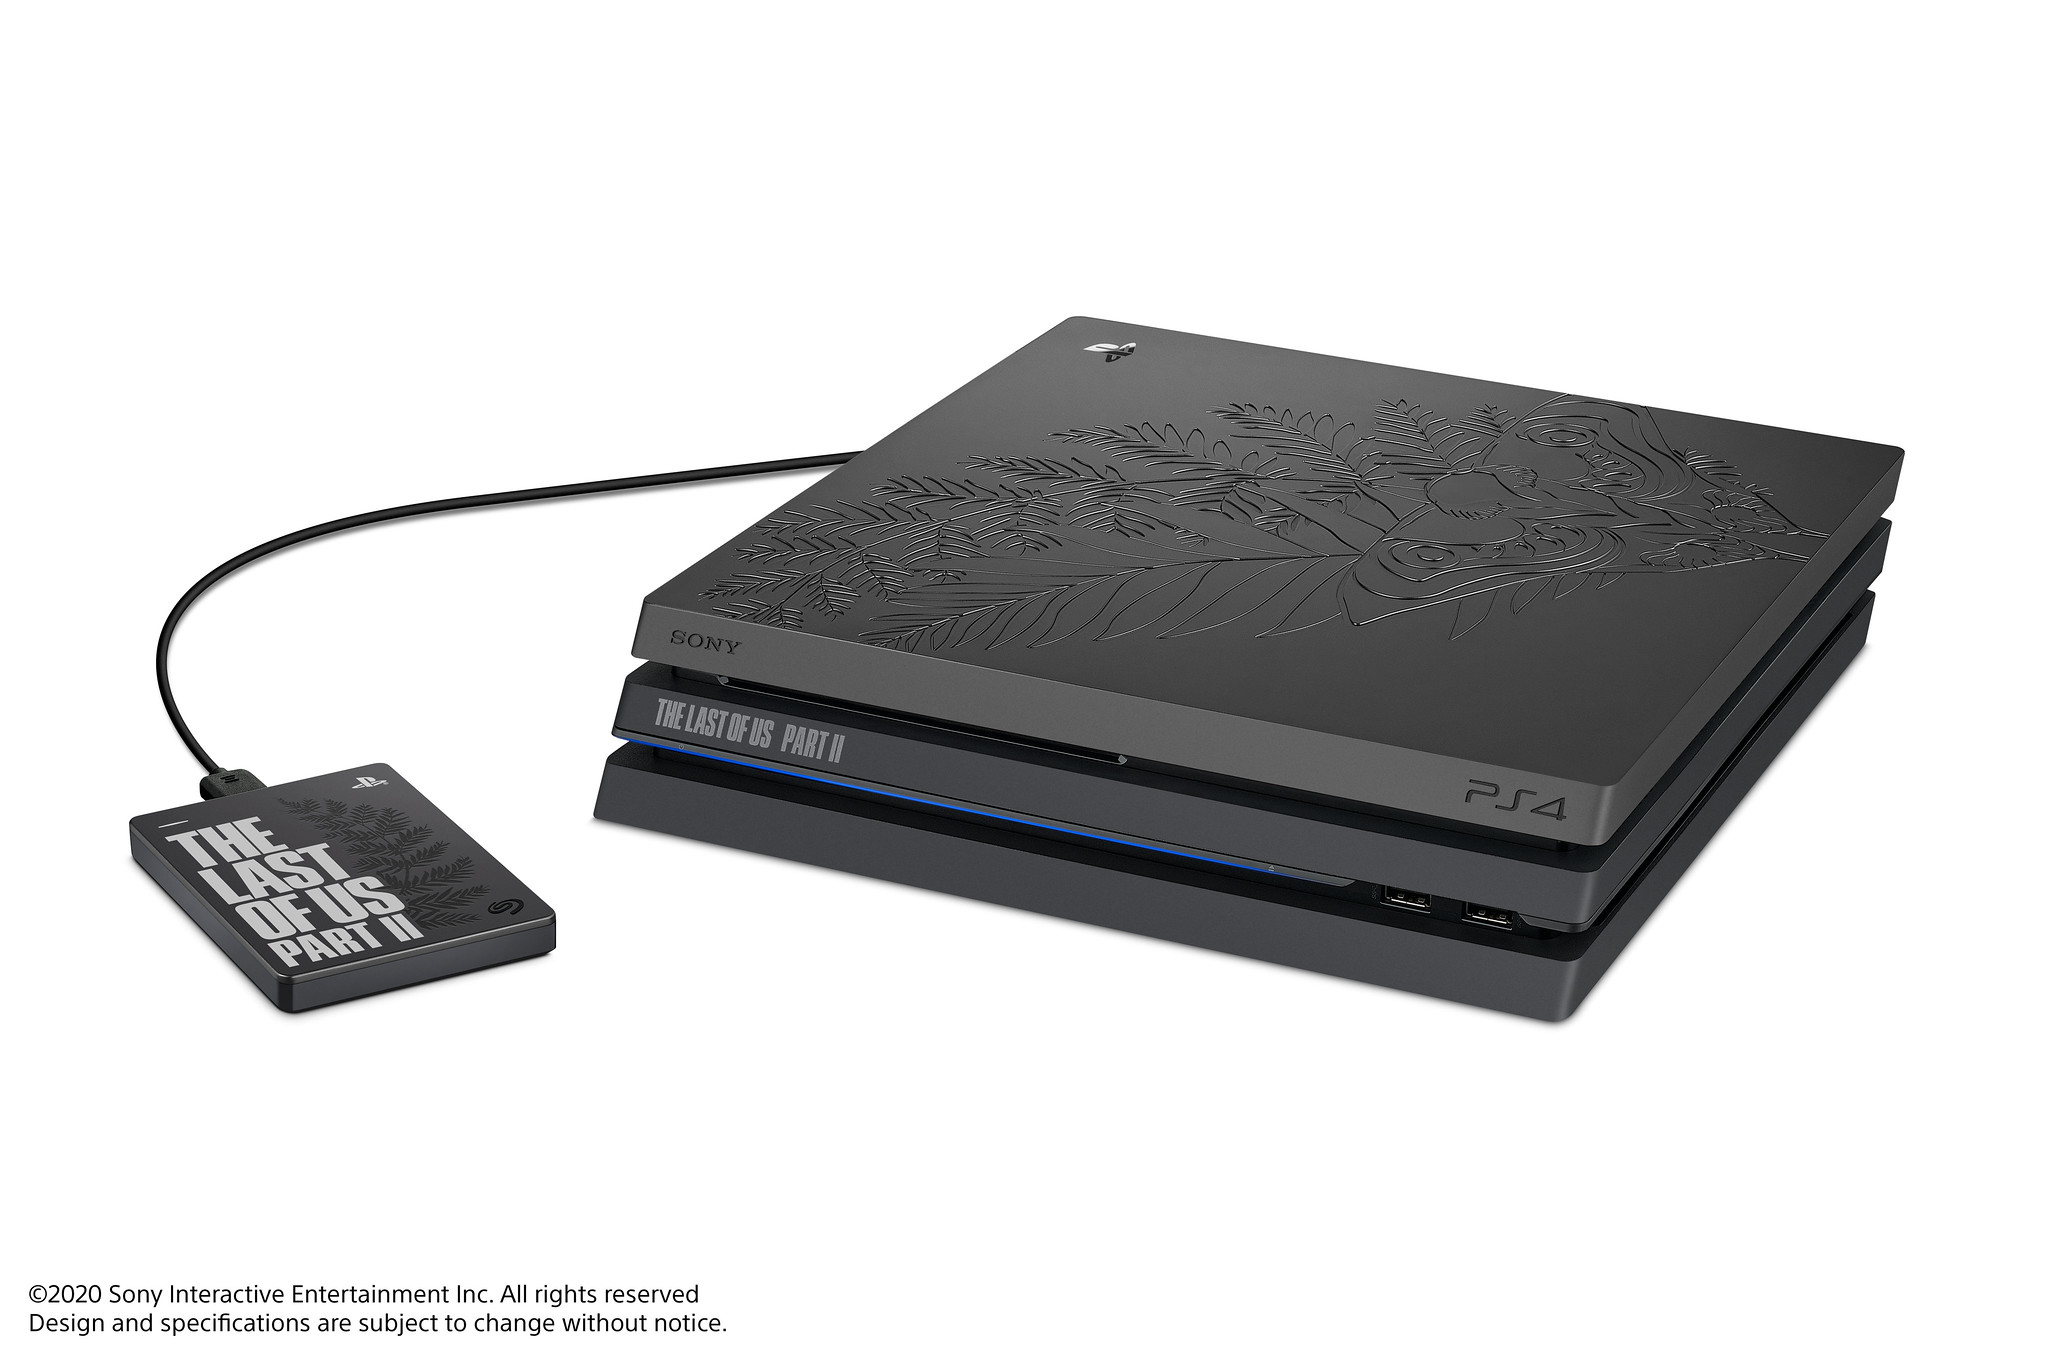 The of Part II limited edition PS4, Game Drive, and headset | KitGuru